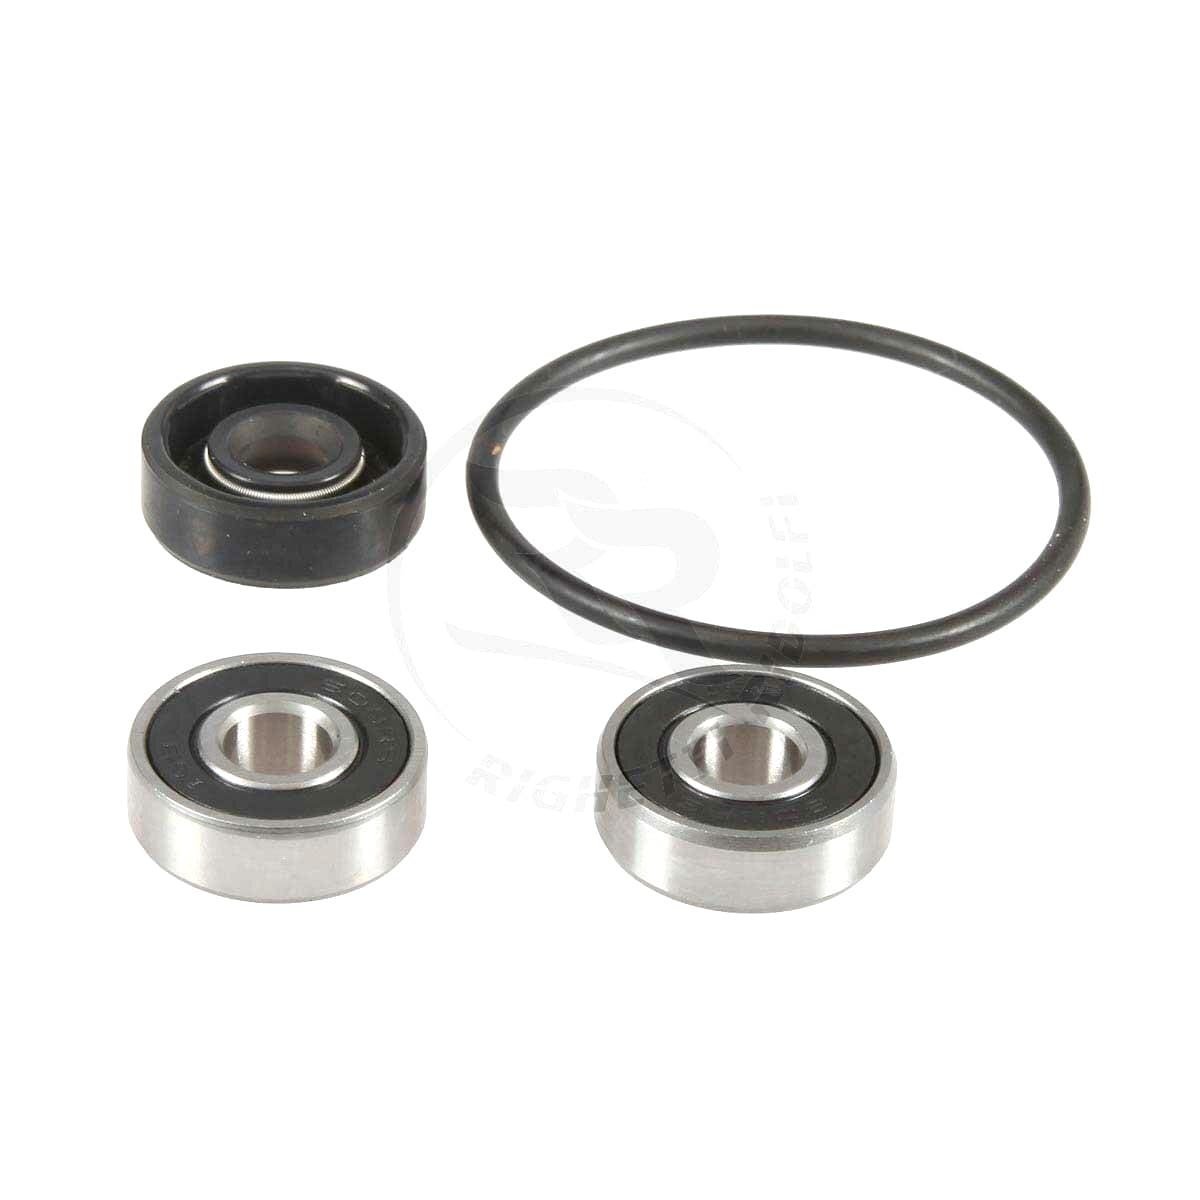 Rebuild Kit for water pumps K514 and K518